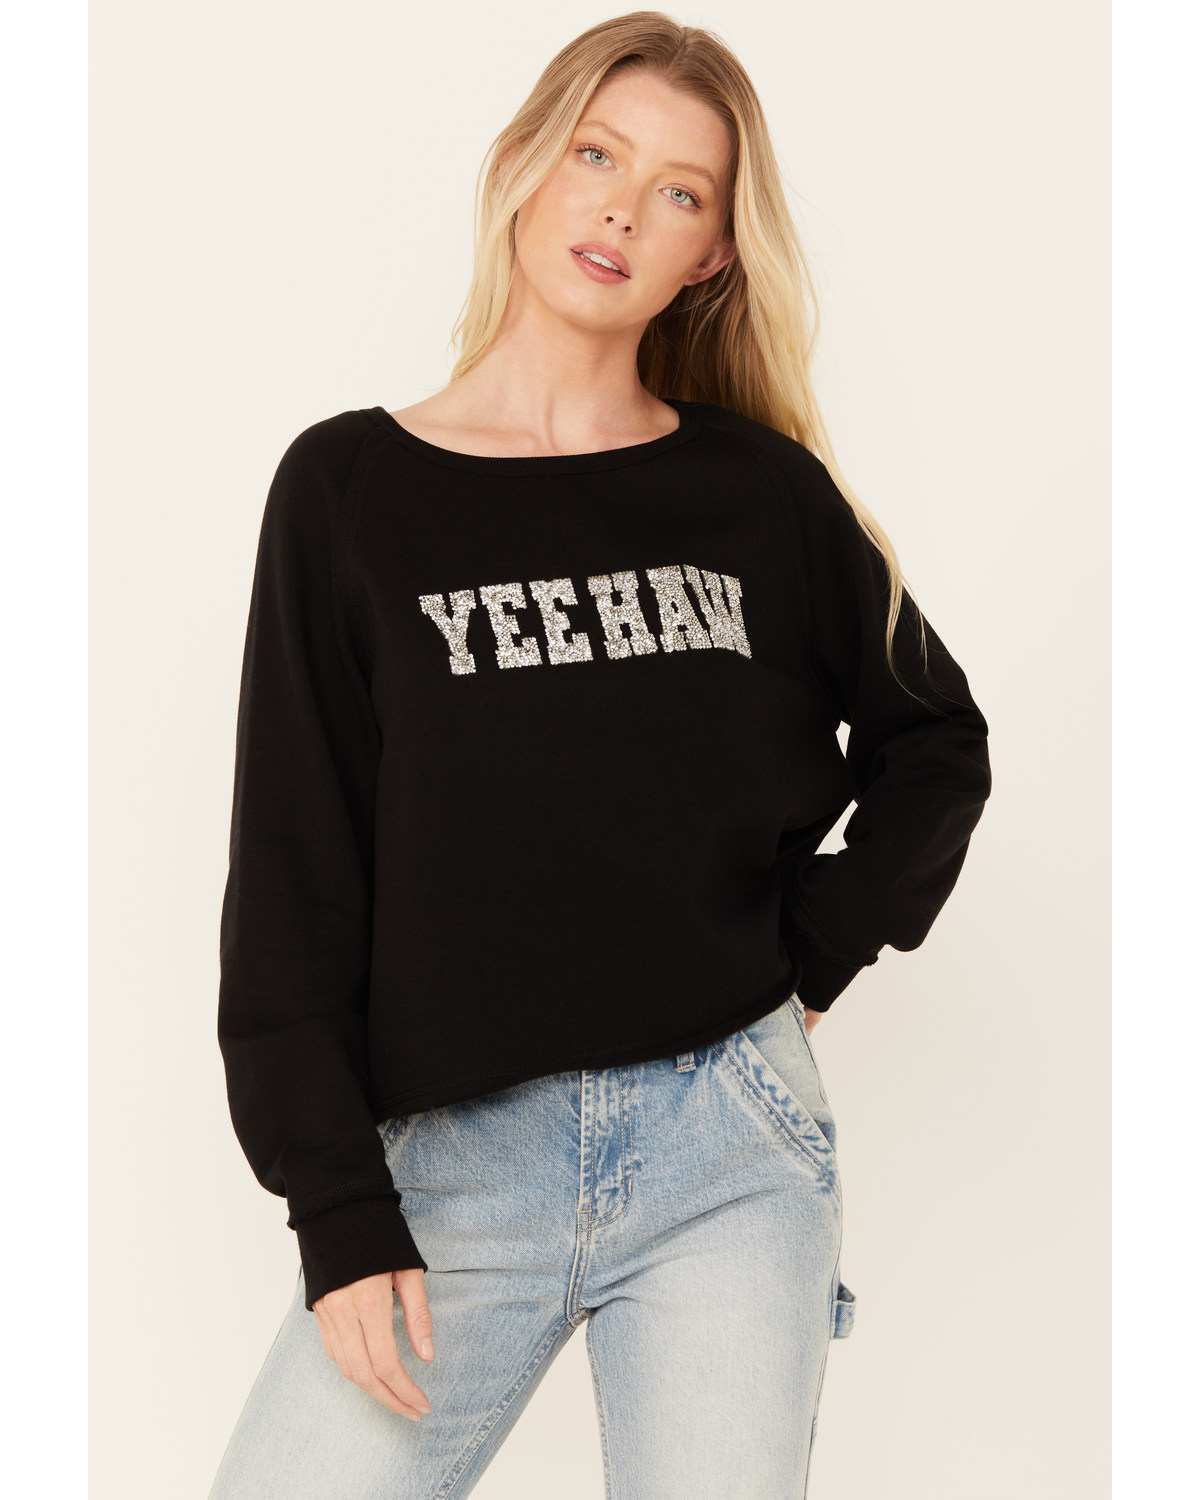 Blended Women's Yee Haw Sequins Graphic Long Sleeve Tee